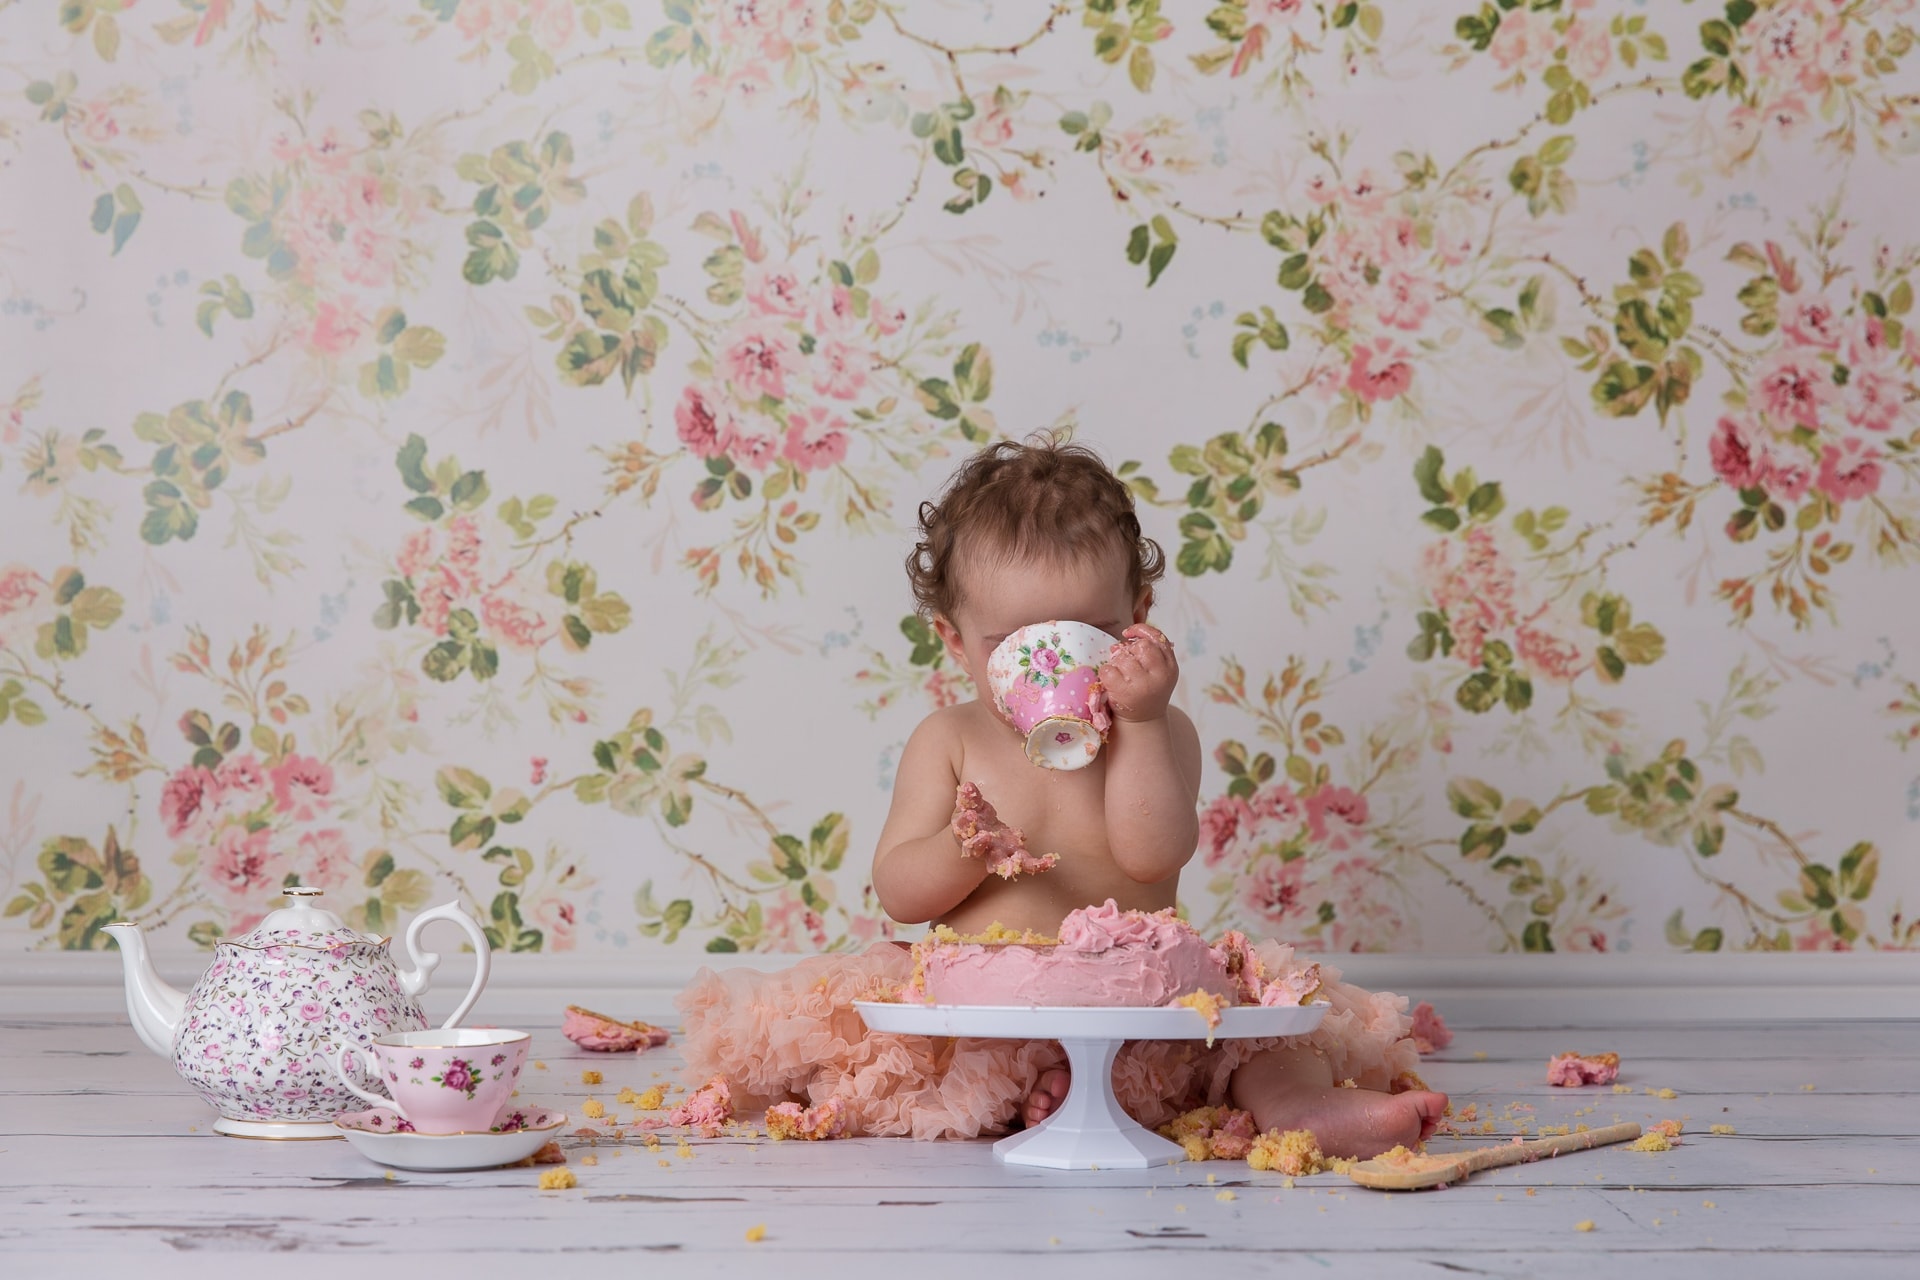 Baby cake smash photography showing one year old girl sipping from tea cup in front of smashed cake